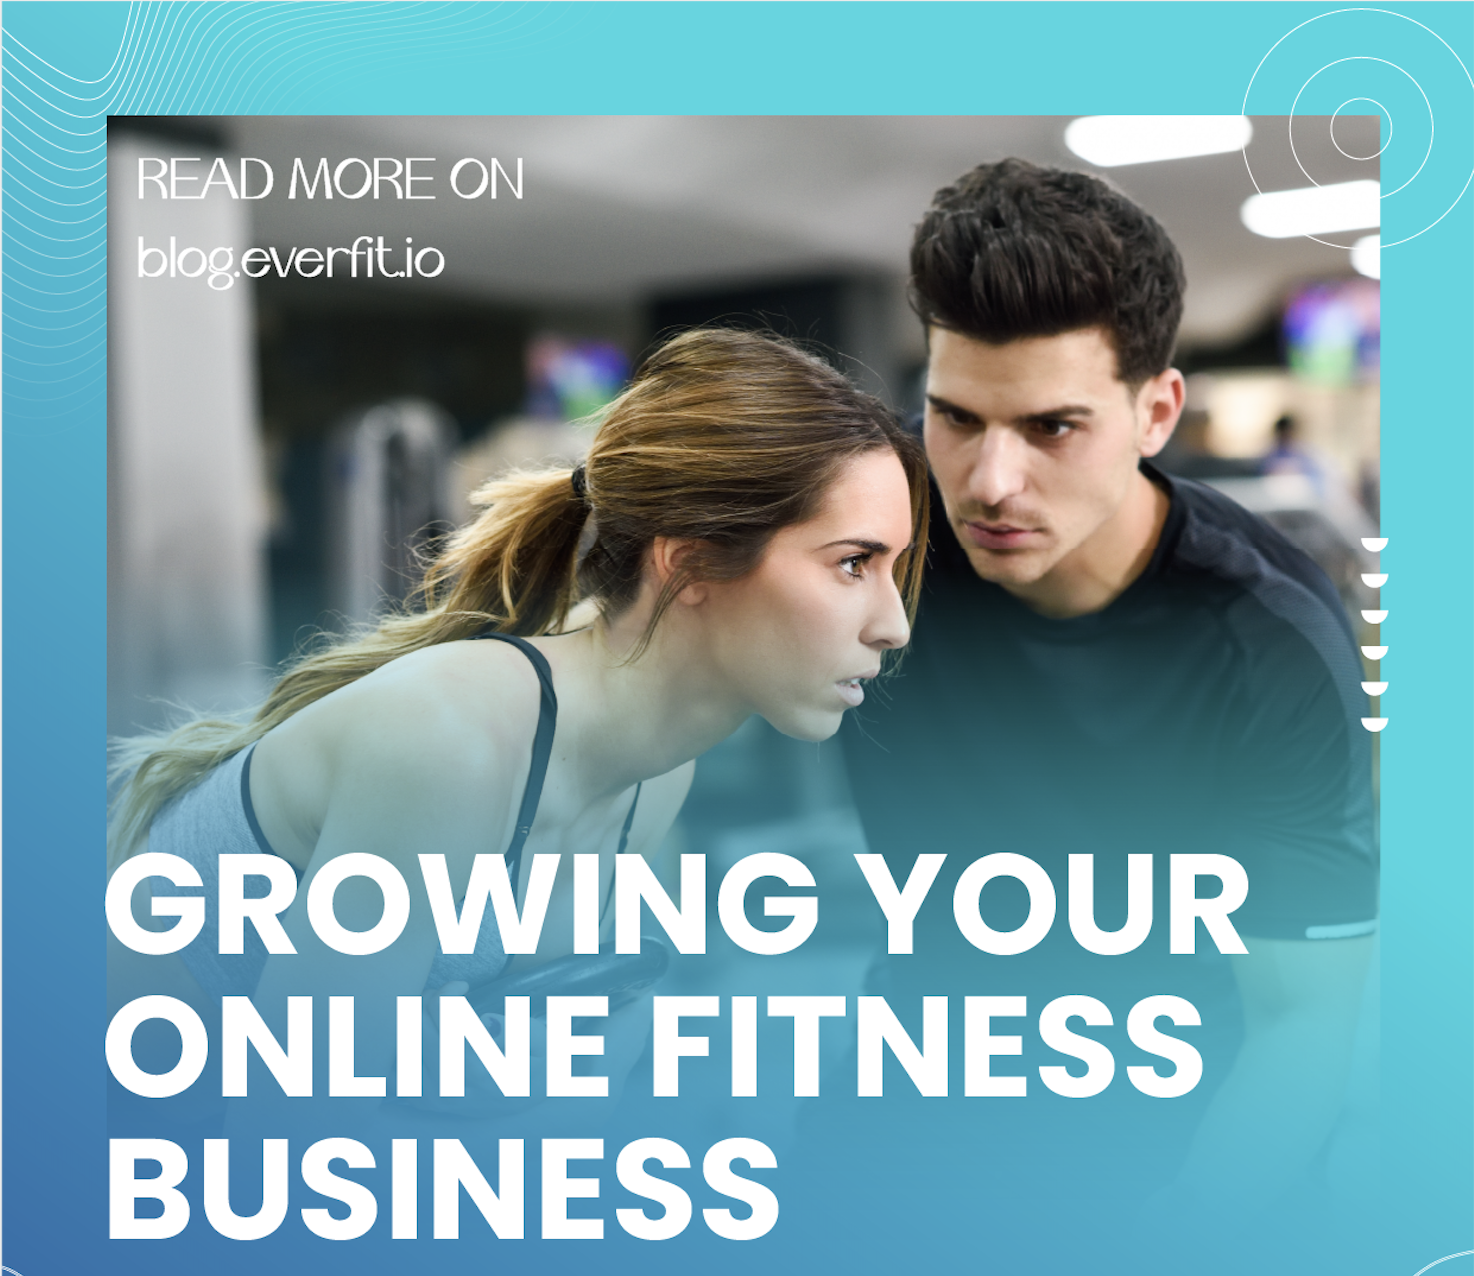 How to Grow Your Online Fitness Business During COVID-19 (+tips for productivity!)